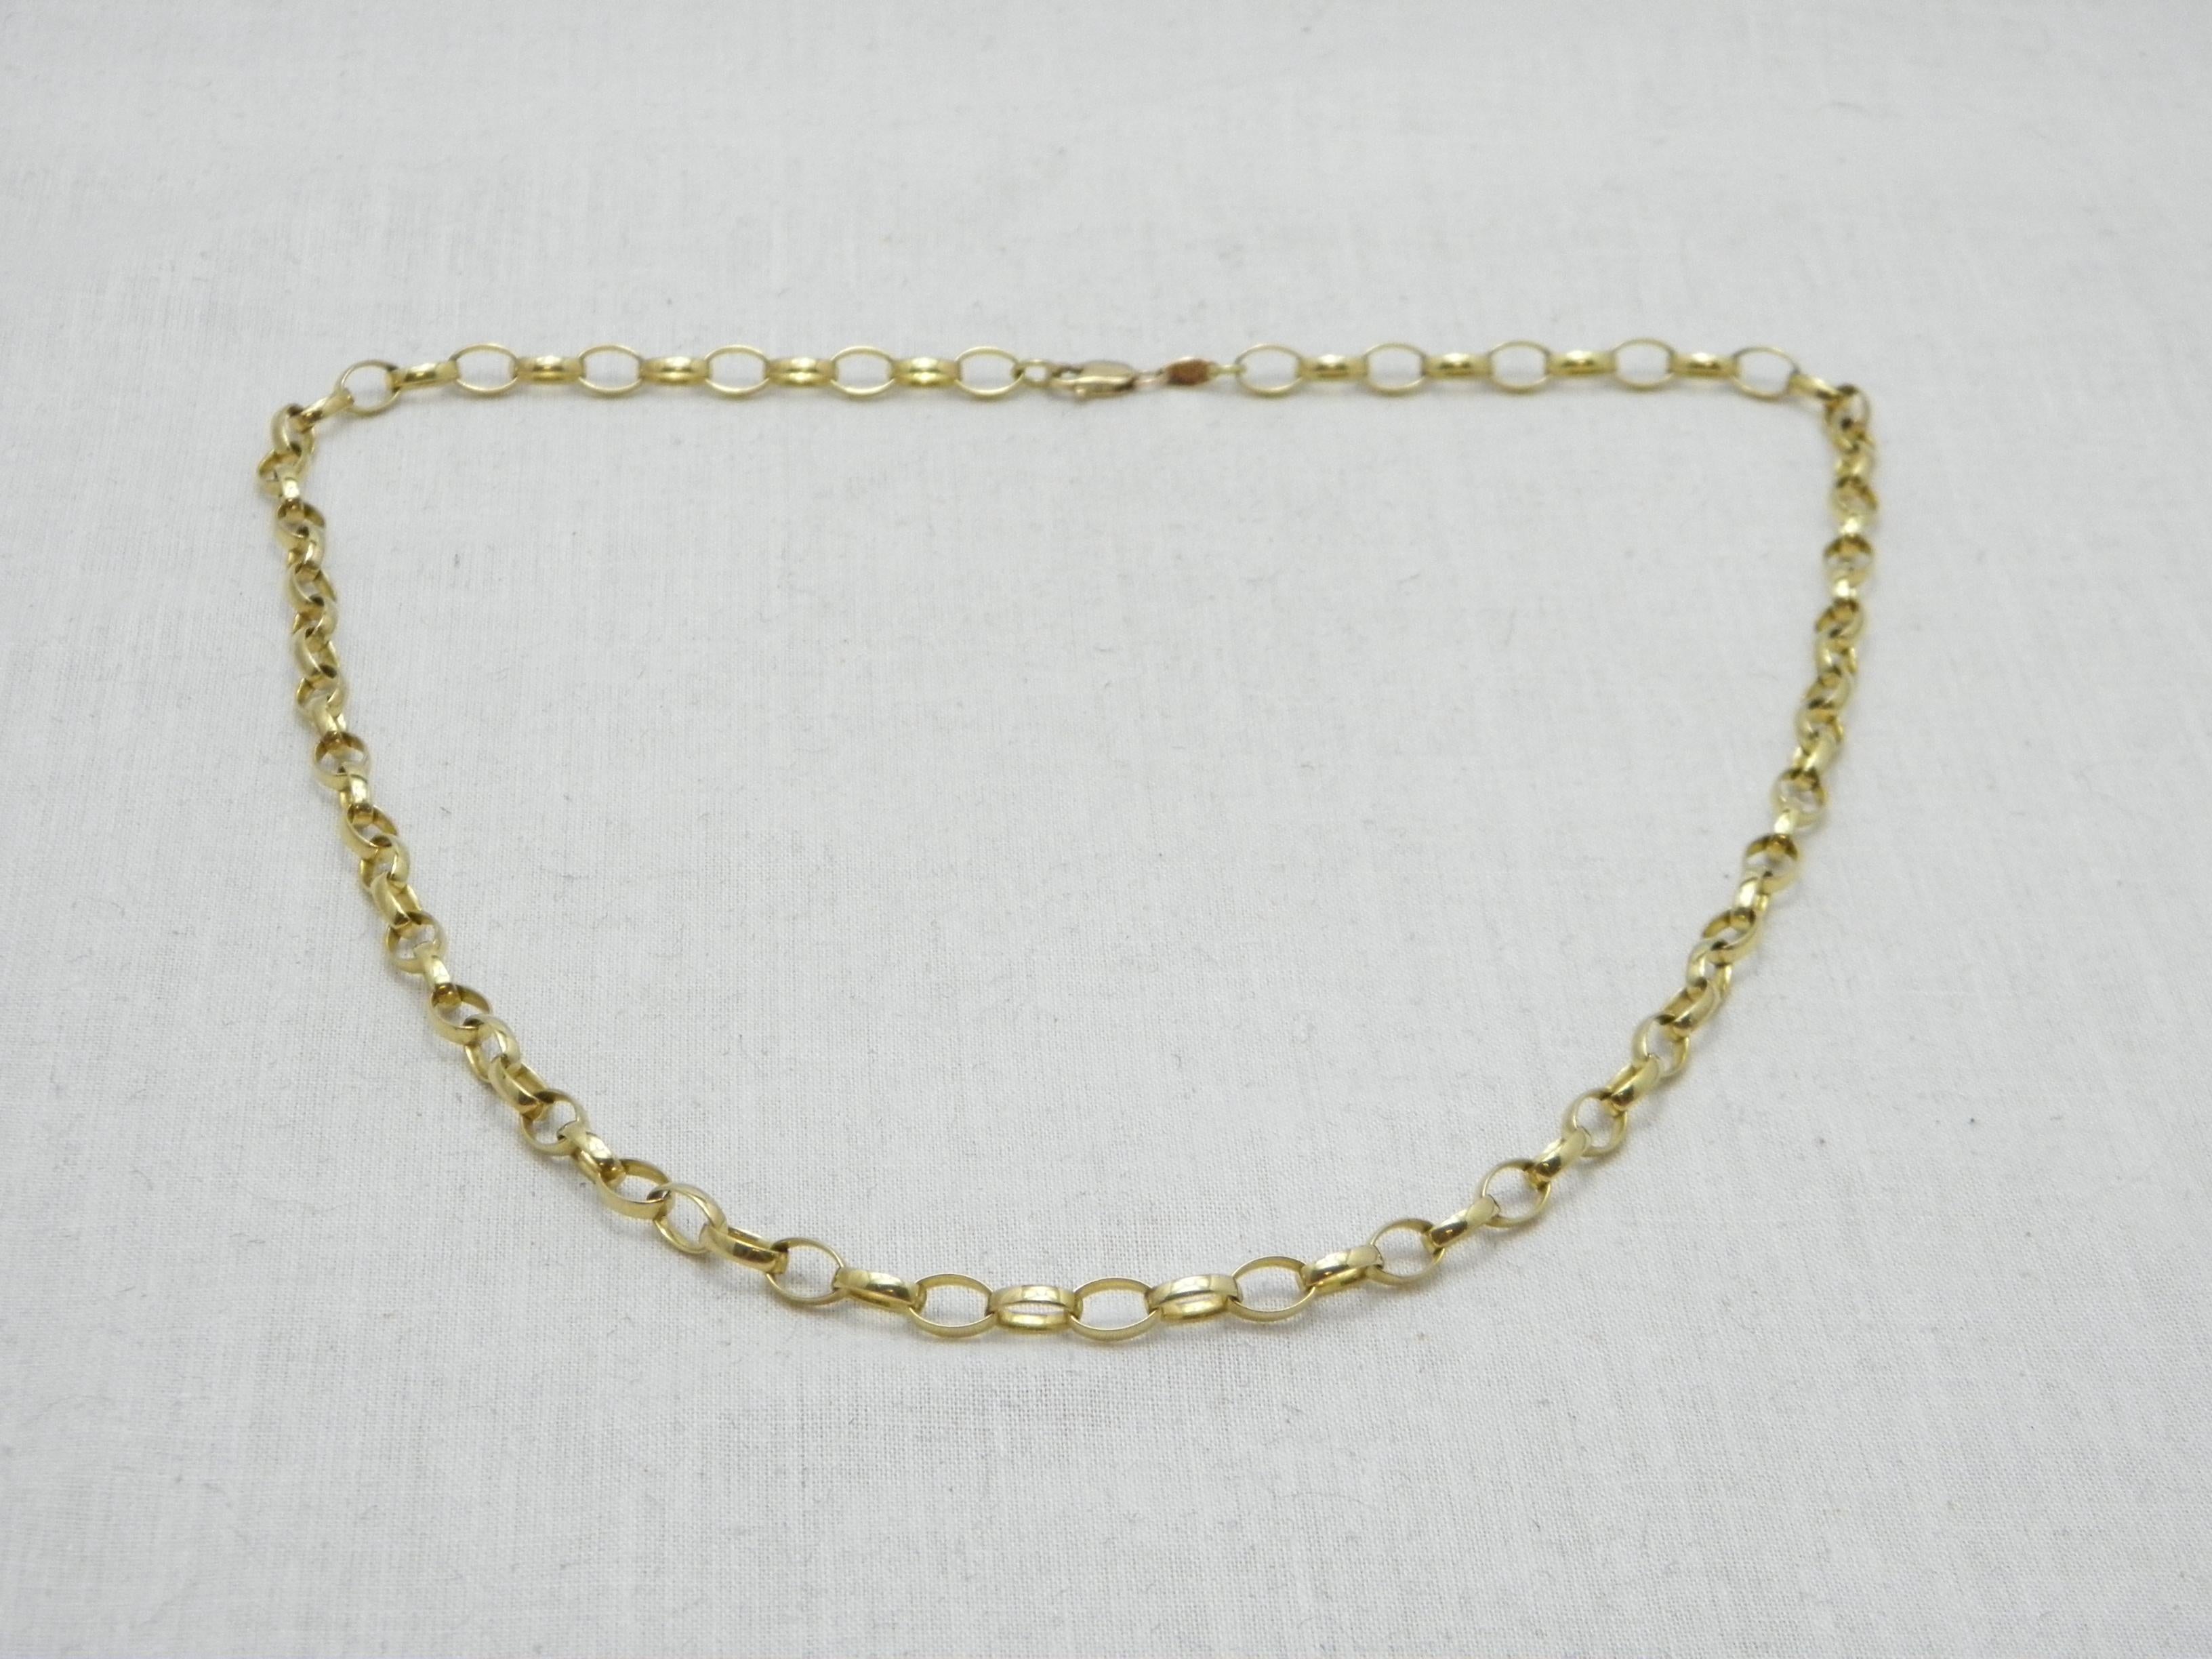 Vintage 9ct Gold Heavy Oval Belcher Necklace 20 Inch Chain 375 Purity 13.2g In Good Condition For Sale In Camelford, GB